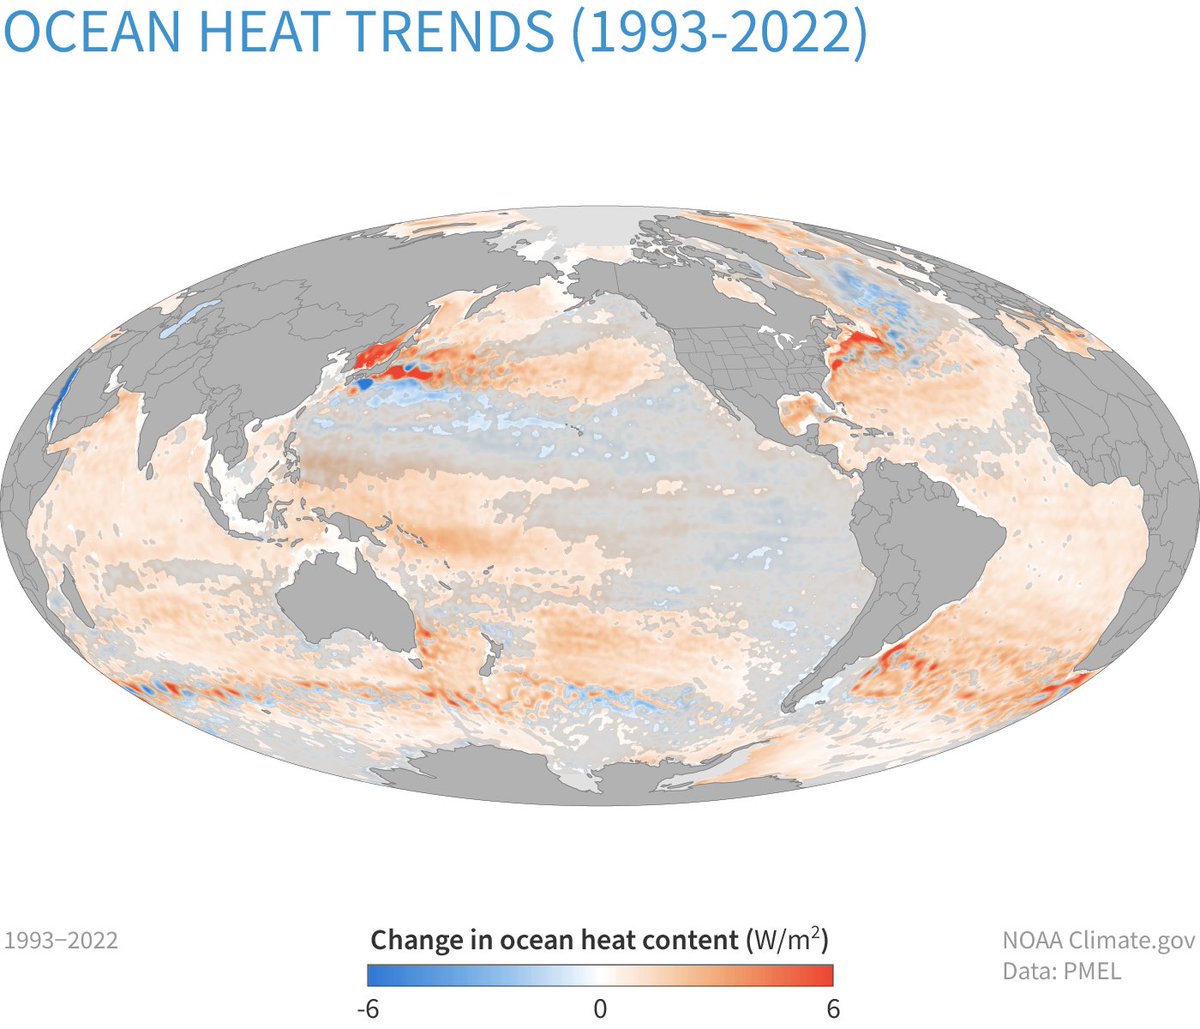 ICYMI: #Heat content in parts of the upper 2,300 feet of the #ocean rose by up to 6 Watts per square meter from 1993-2022 (dark orange). Some areas lost heat (blue). Changes in areas shaded gray were small relative to the range of natural variability. shorturl.at/wGST7